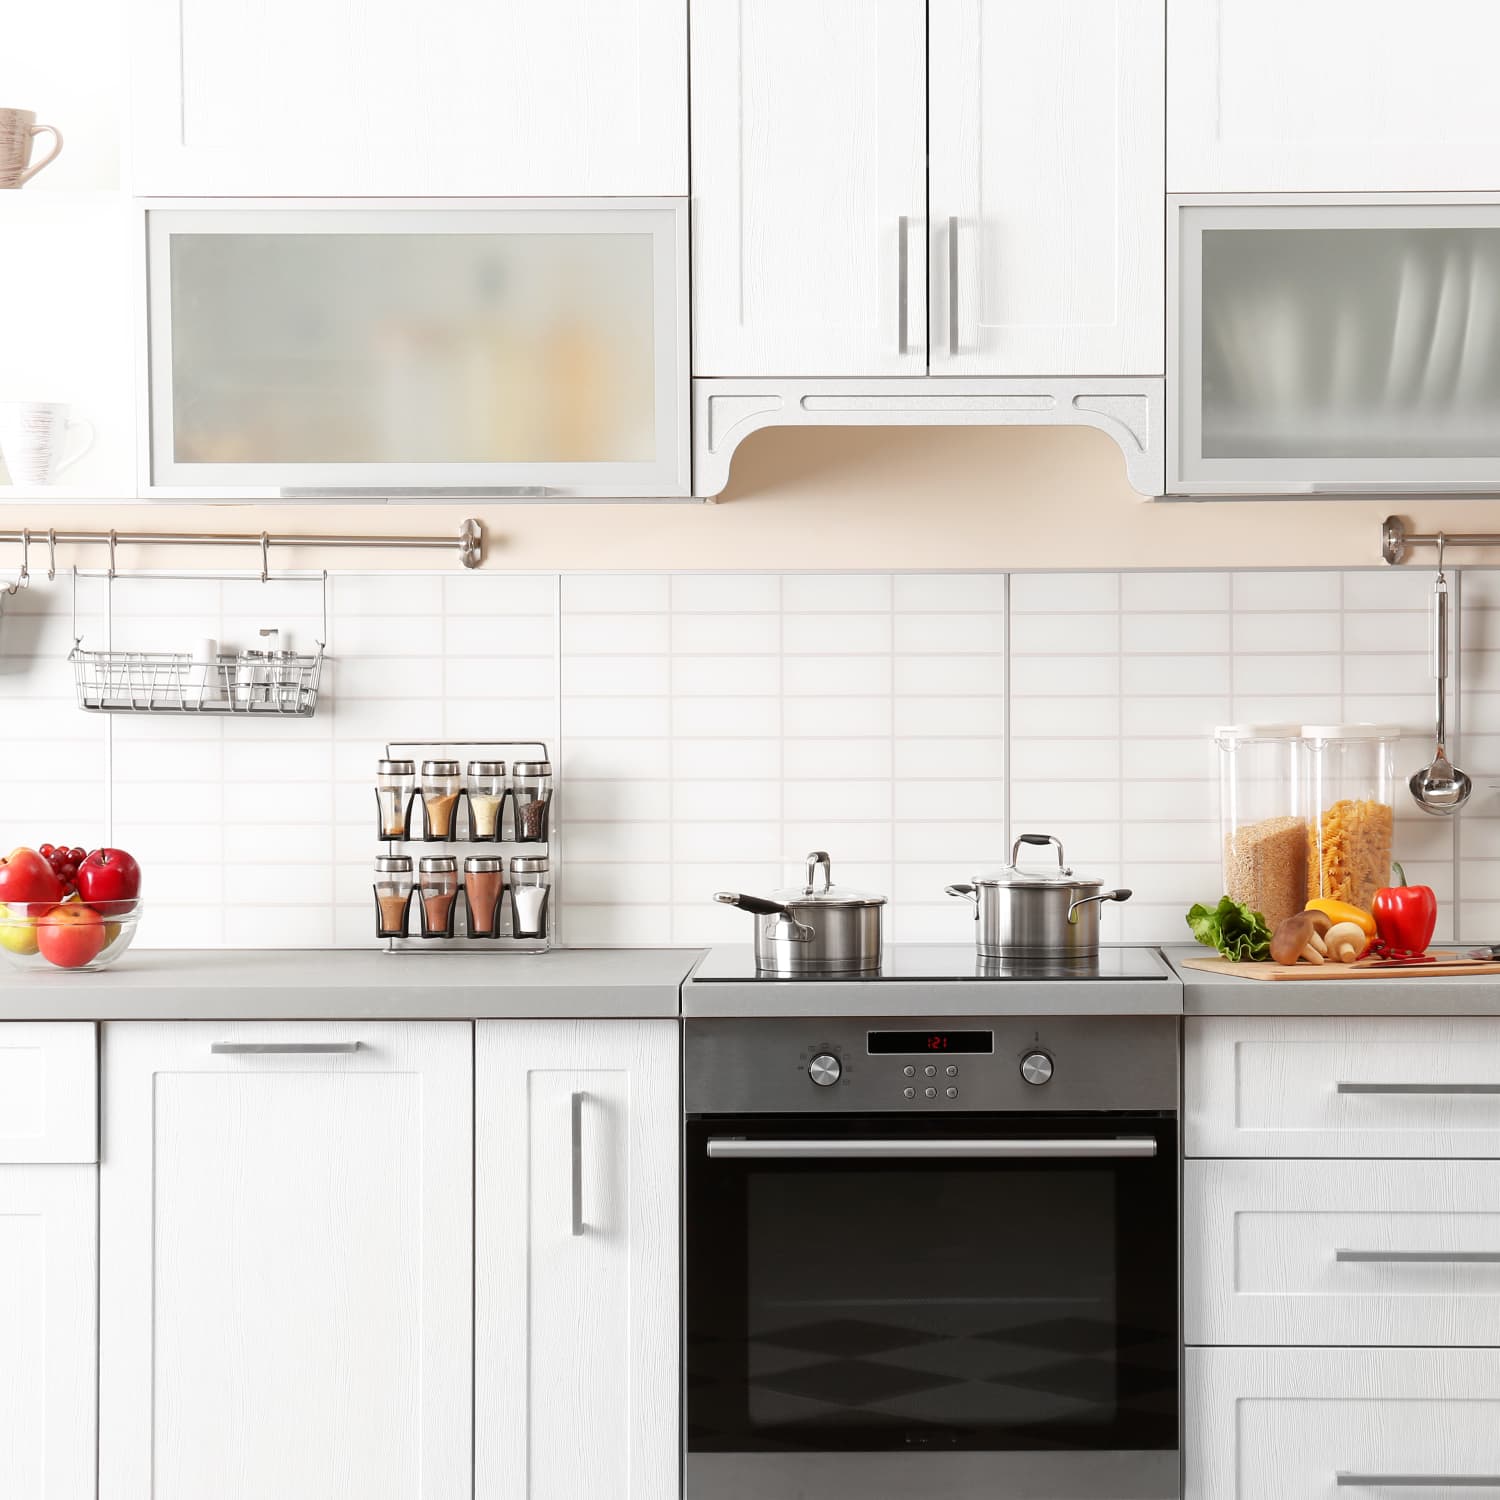 White Kitchens Are Out for 25, According to These Home Pros ...